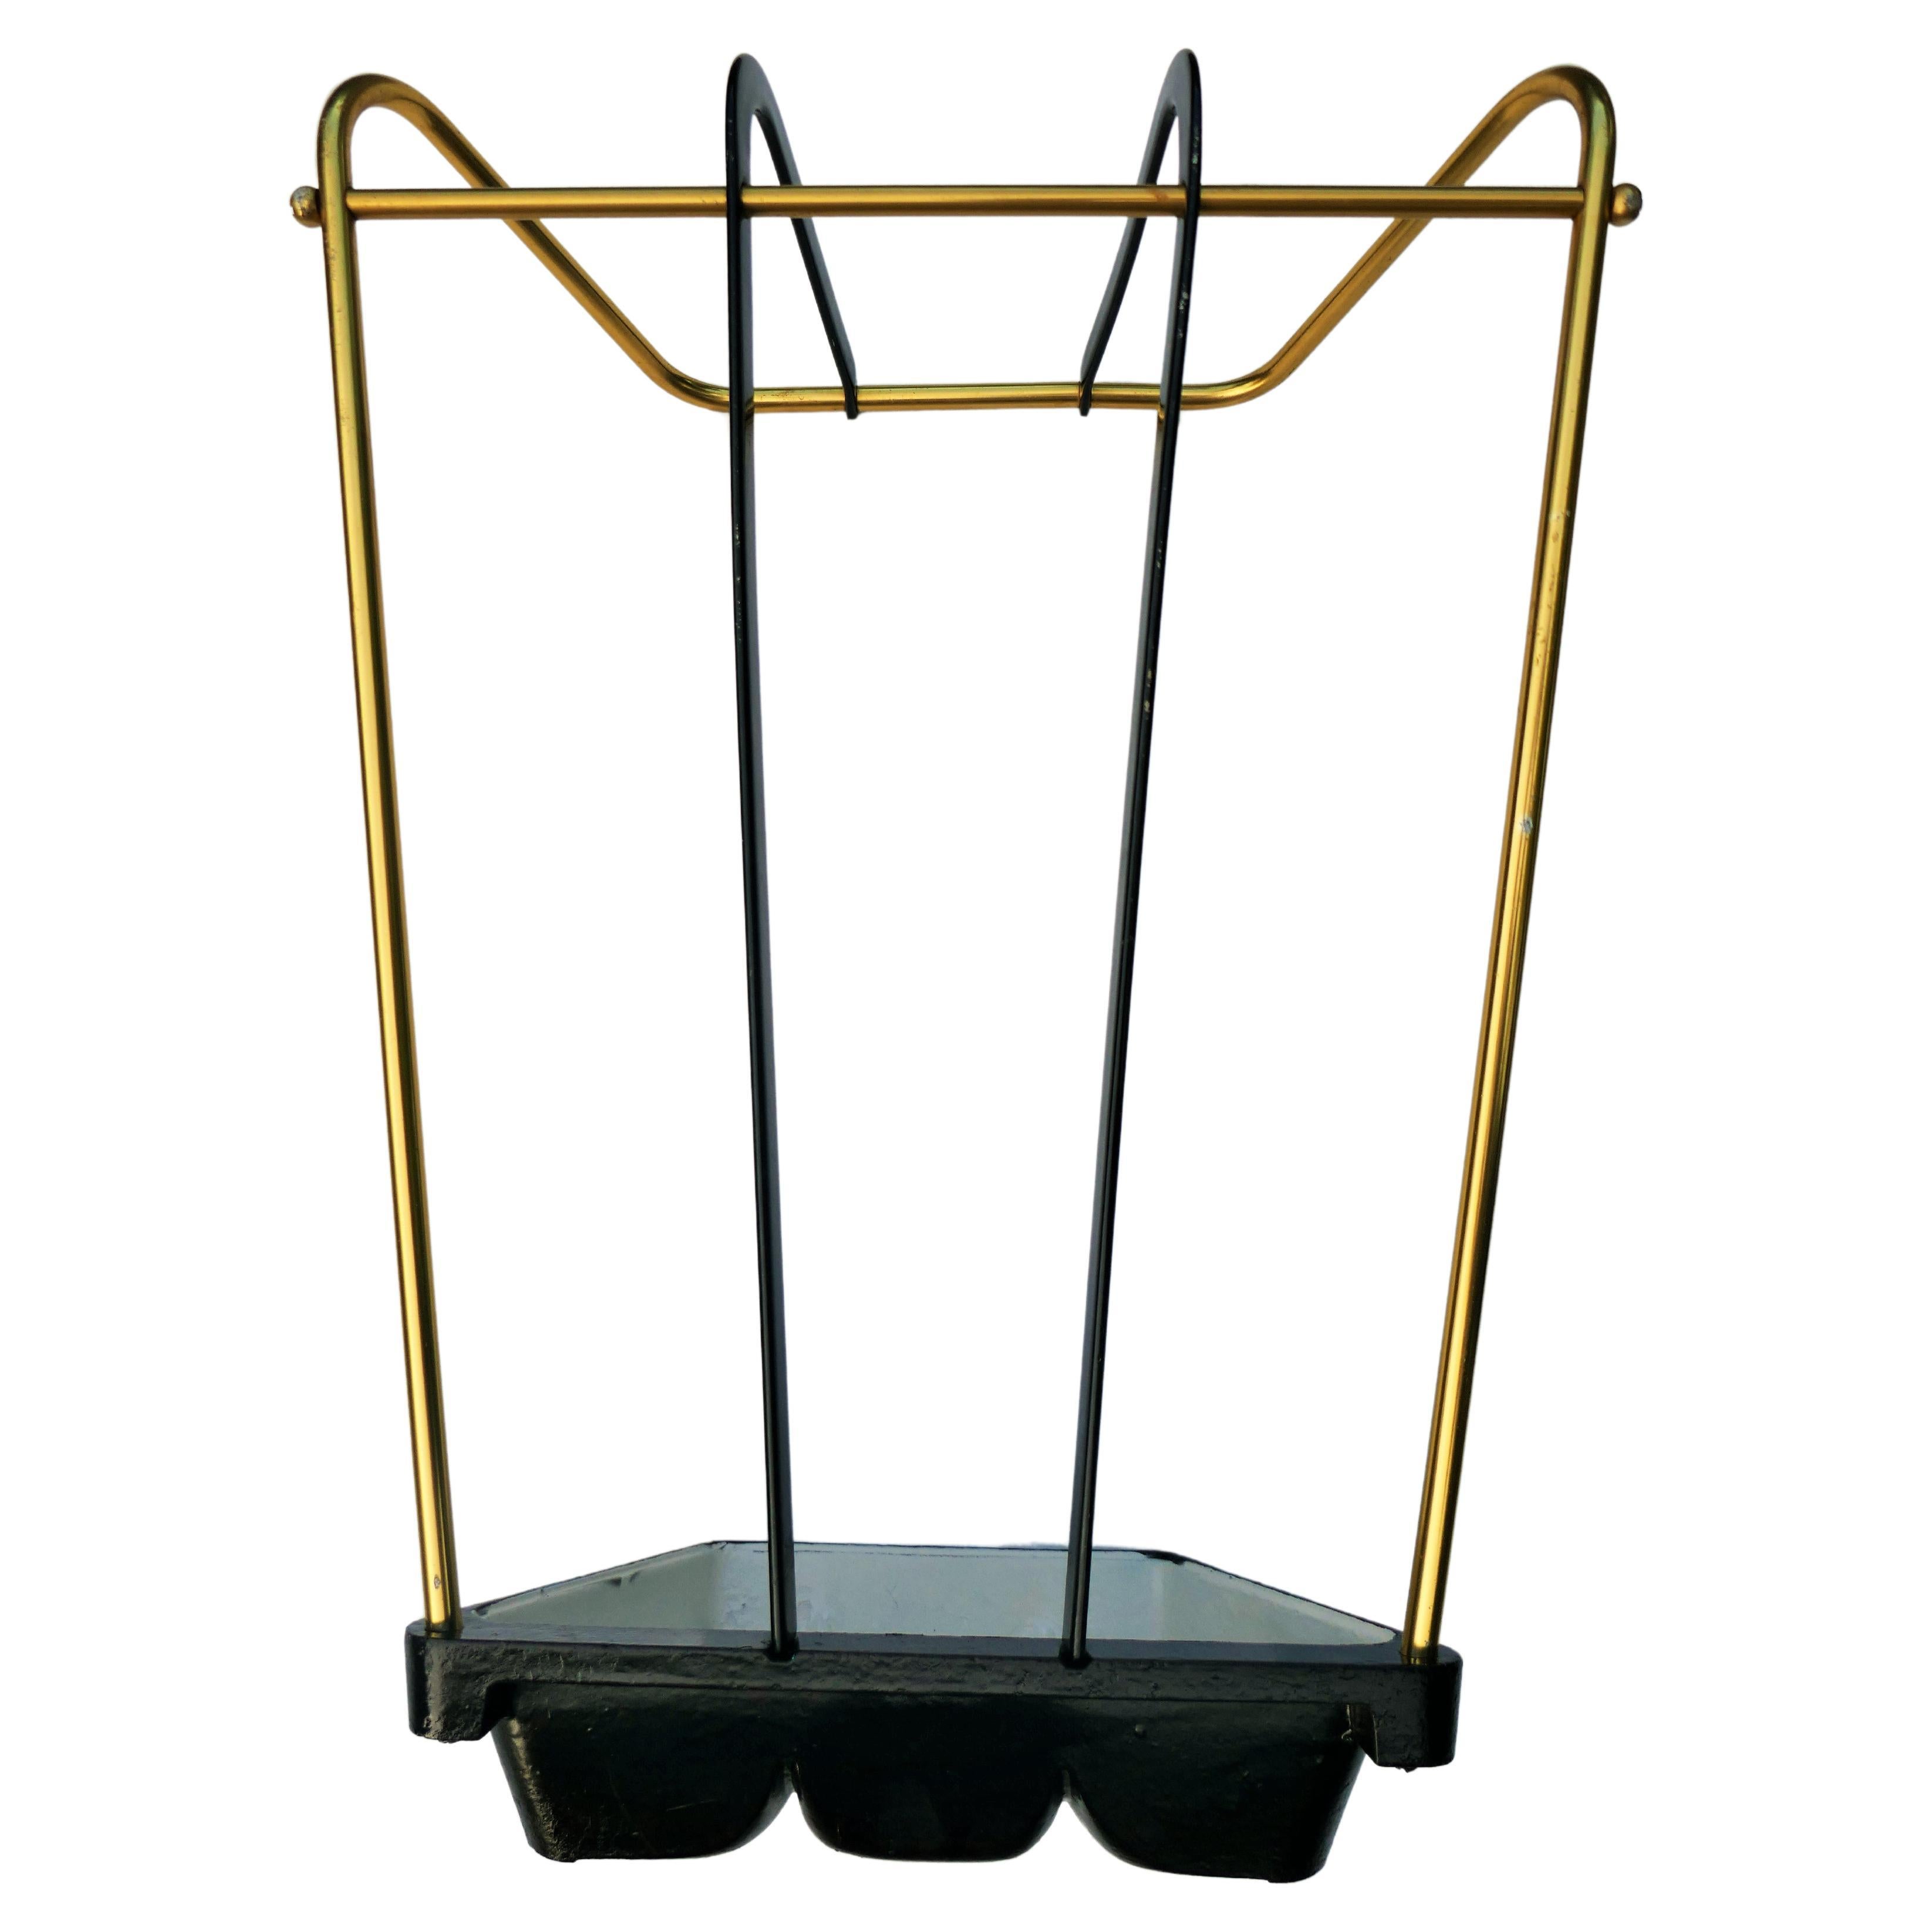 Umbrella stand possible German production - Bauhaus In Good Condition For Sale In Lugo, IT